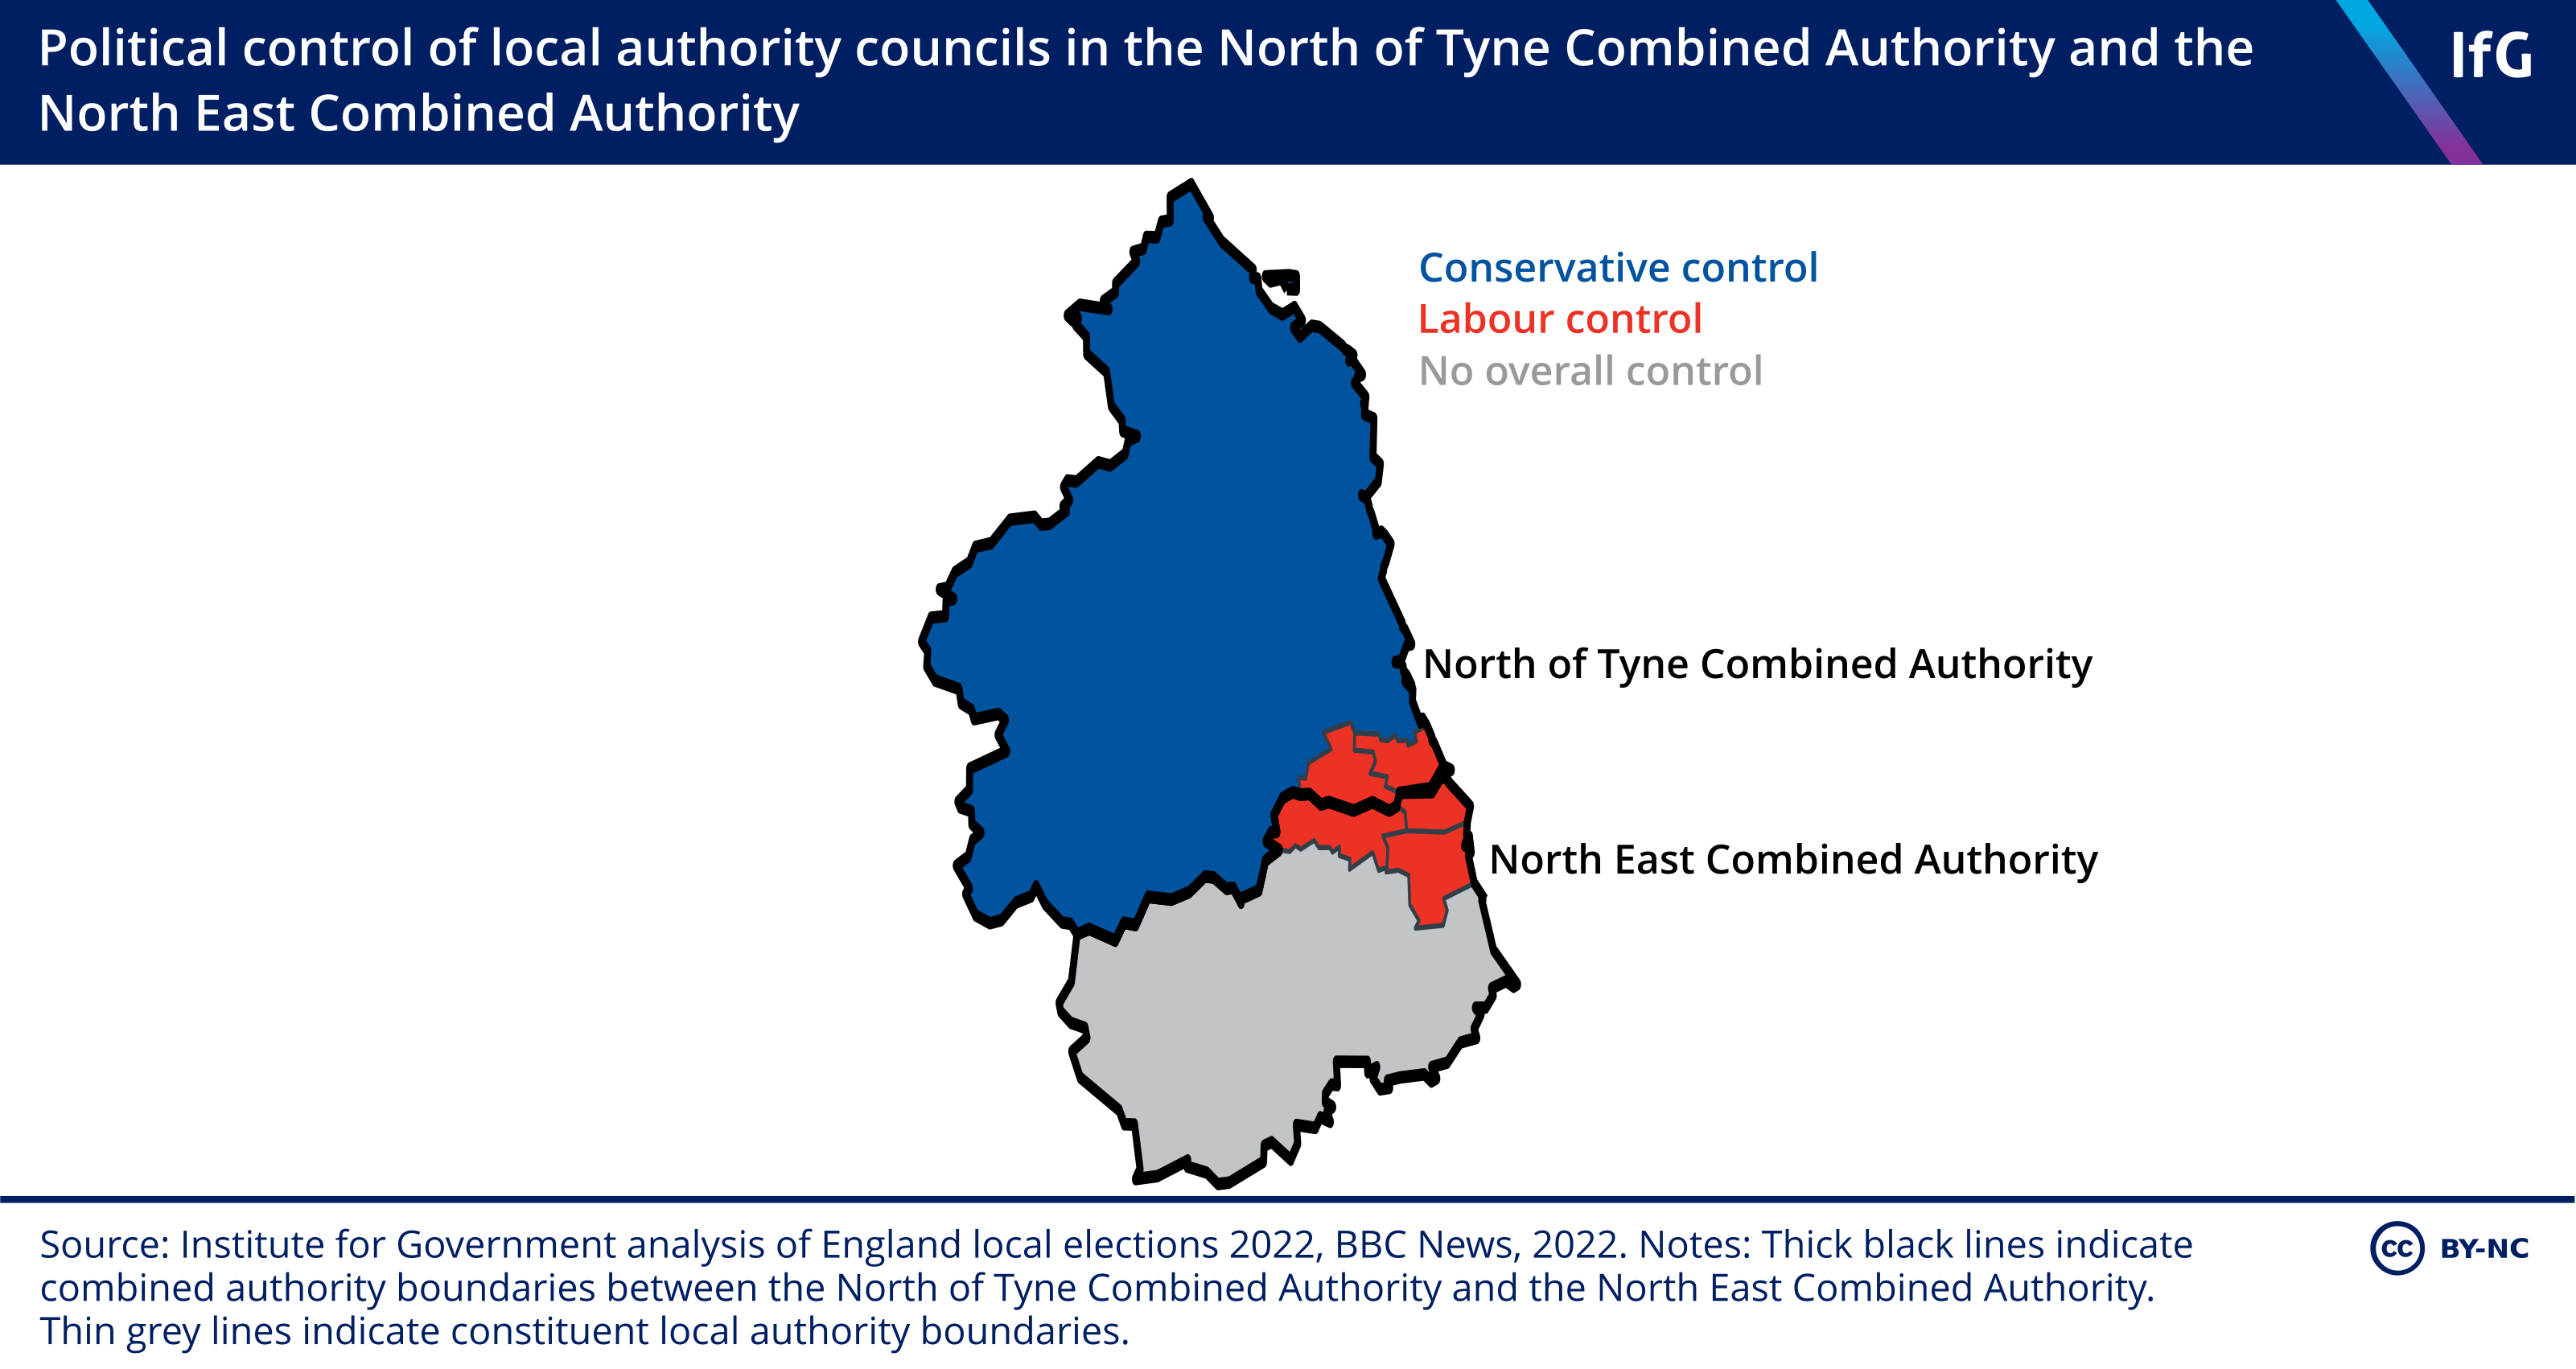 Political control of local authority councils in the North of Tyne Combined Authority and the North East Combined Authority